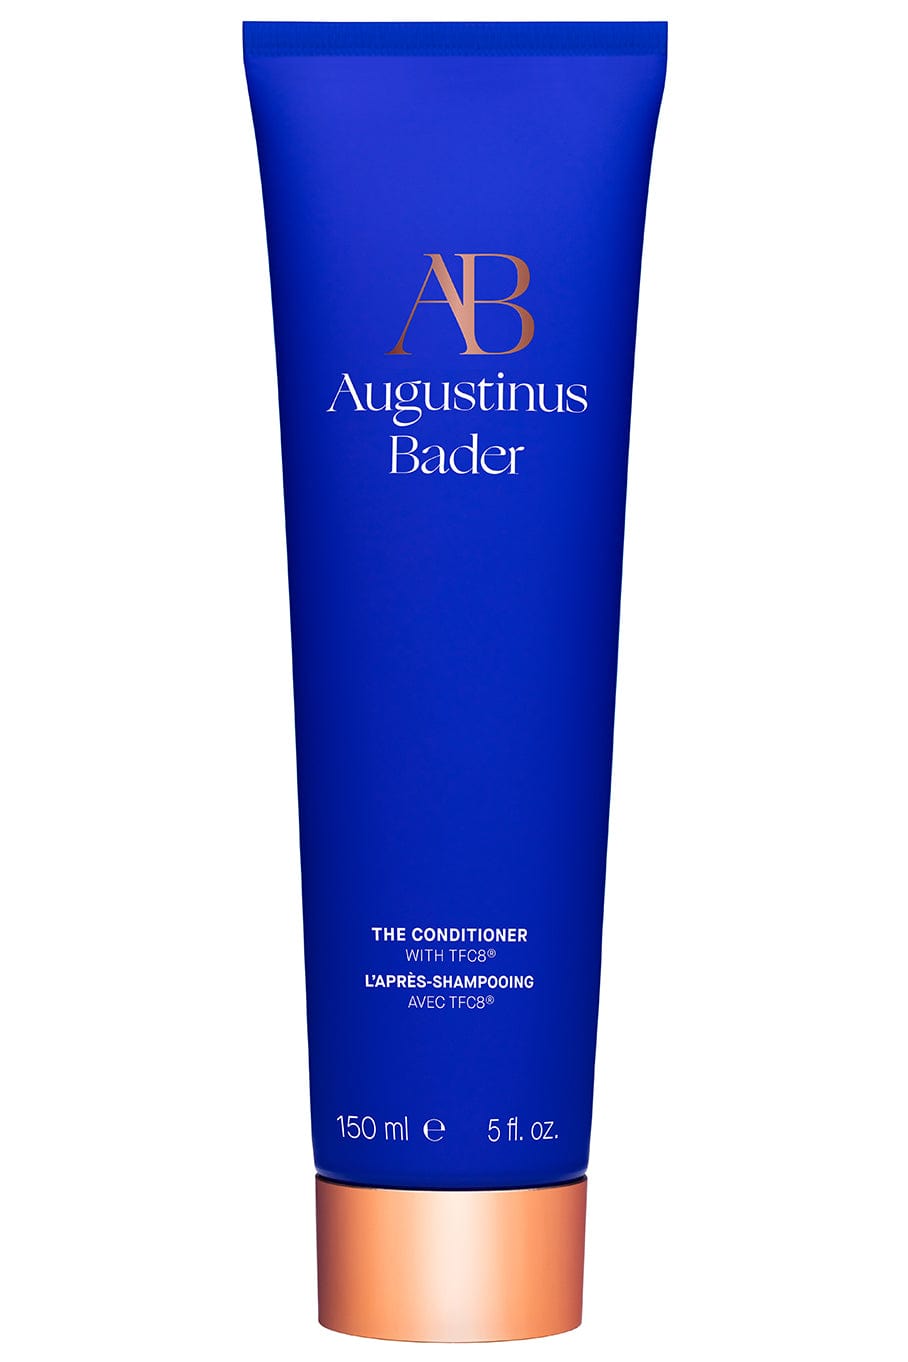 AUGUSTINUS BADER-The Conditioner 150ml-AS SAM